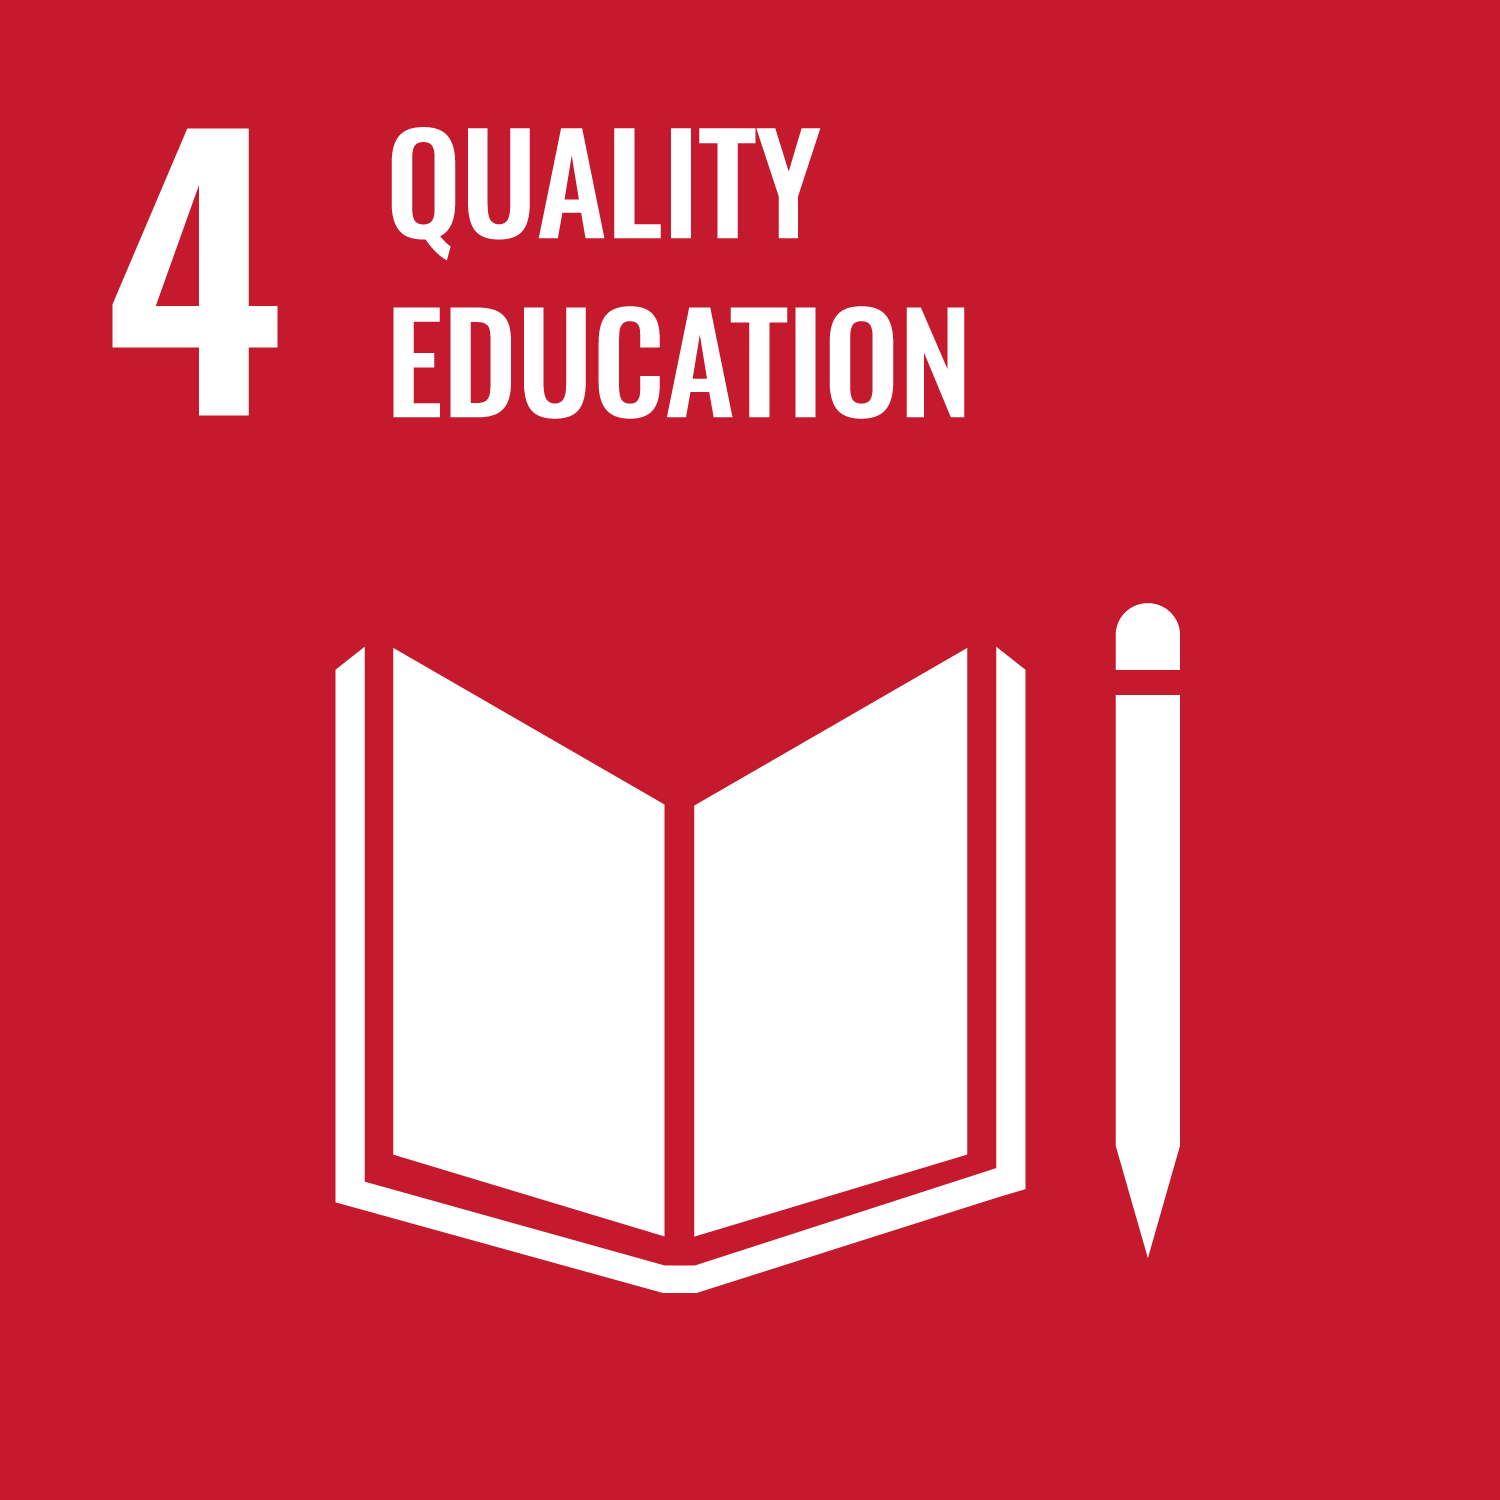 Enhancing Teacher Education for Bridging the Education Quality Gap in Africa